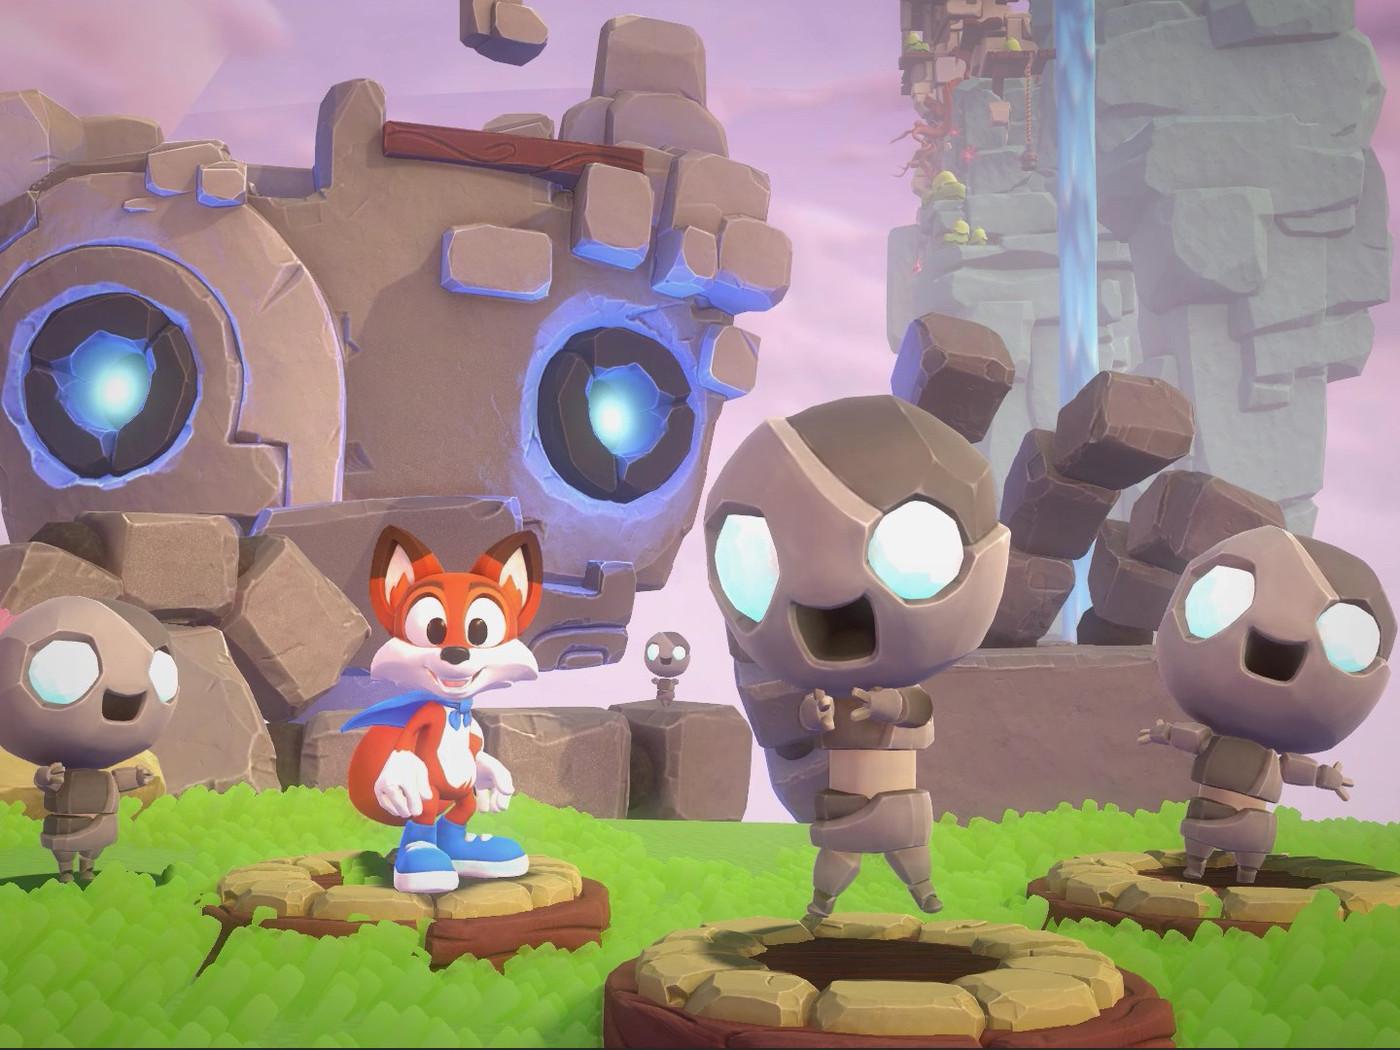 Super Lucky's Tale doesn't get lost in its nostalgia